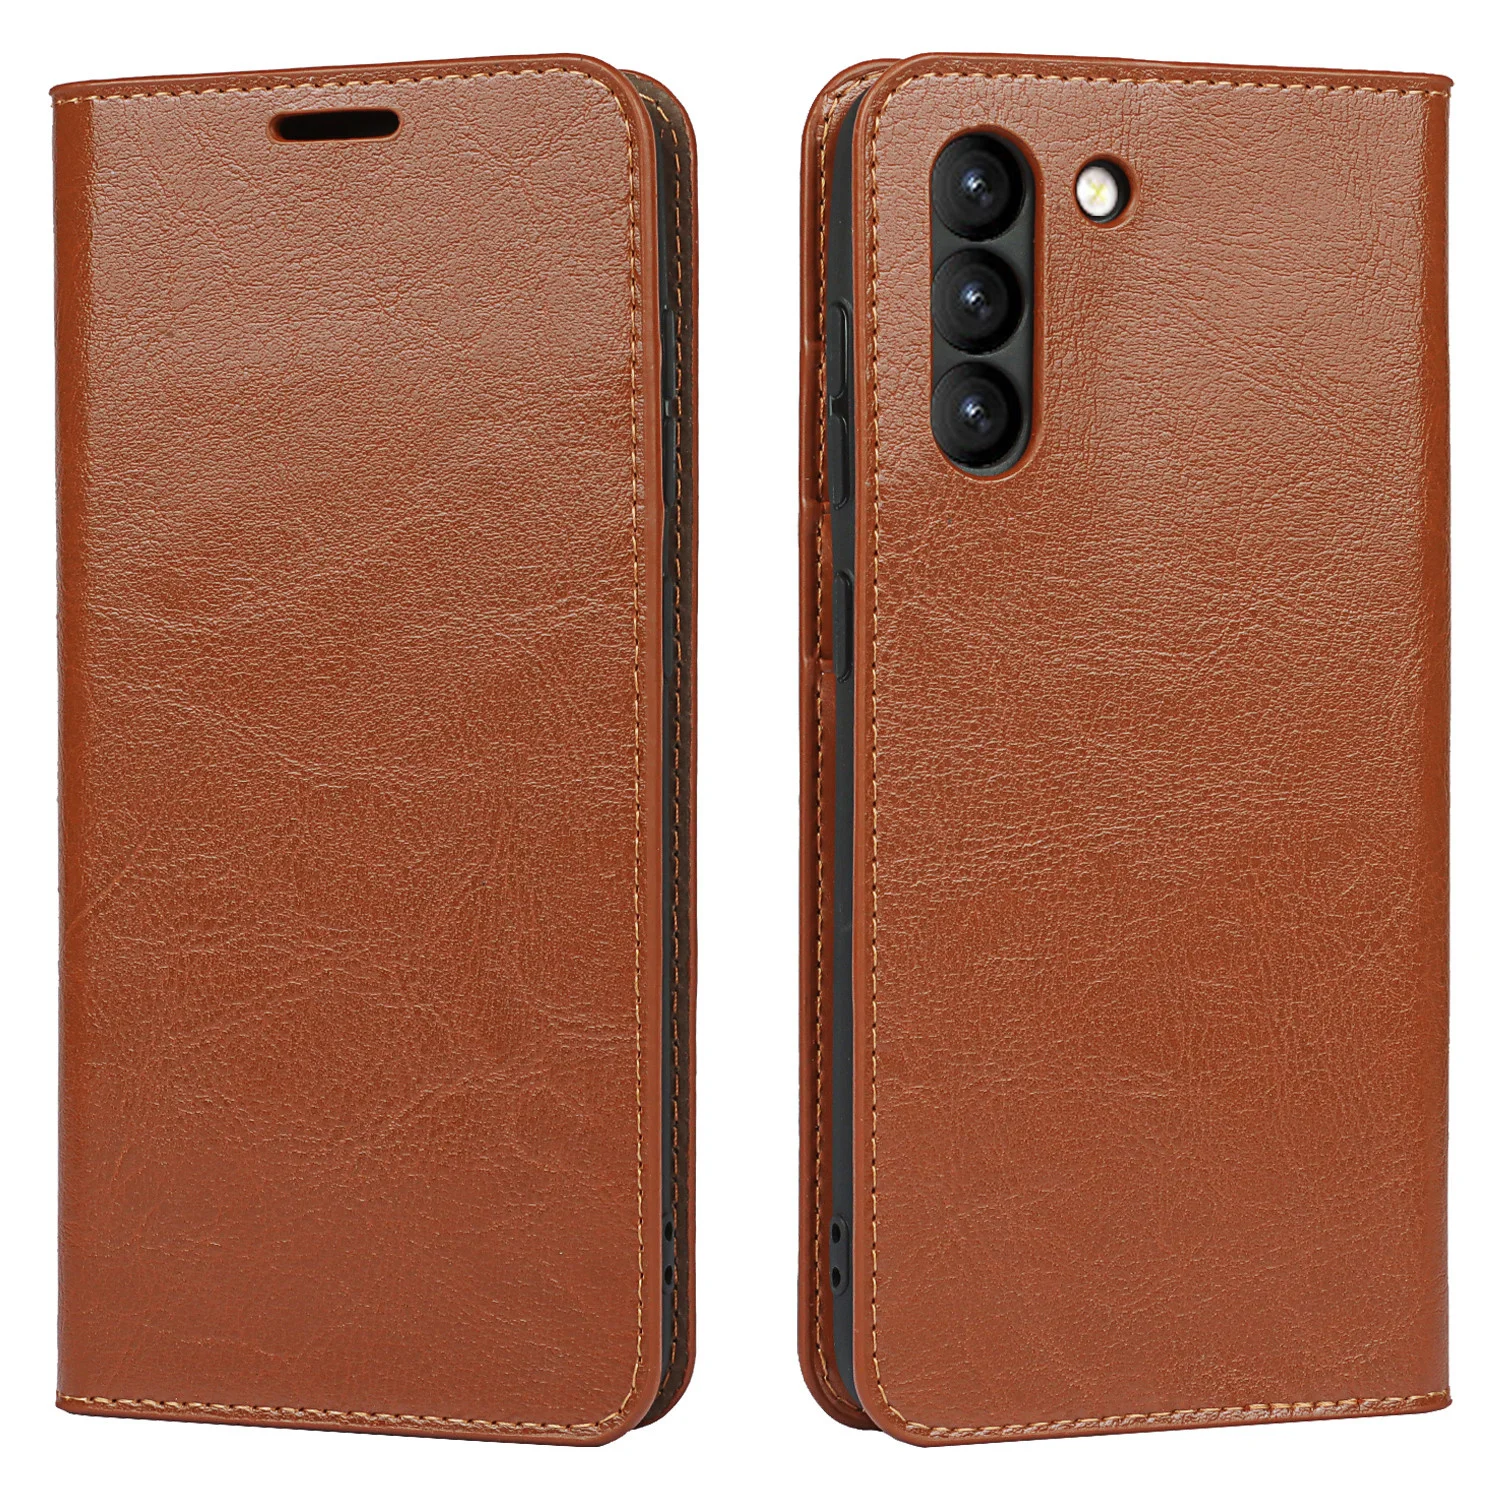 100% Real Genuine Leather Flip for Samsung Galaxy S20 S21 S22 Ultra Plus A53 A33 A52 A72 5G Case Wallet with Credit Card Holder galaxy s22 ultra flip case